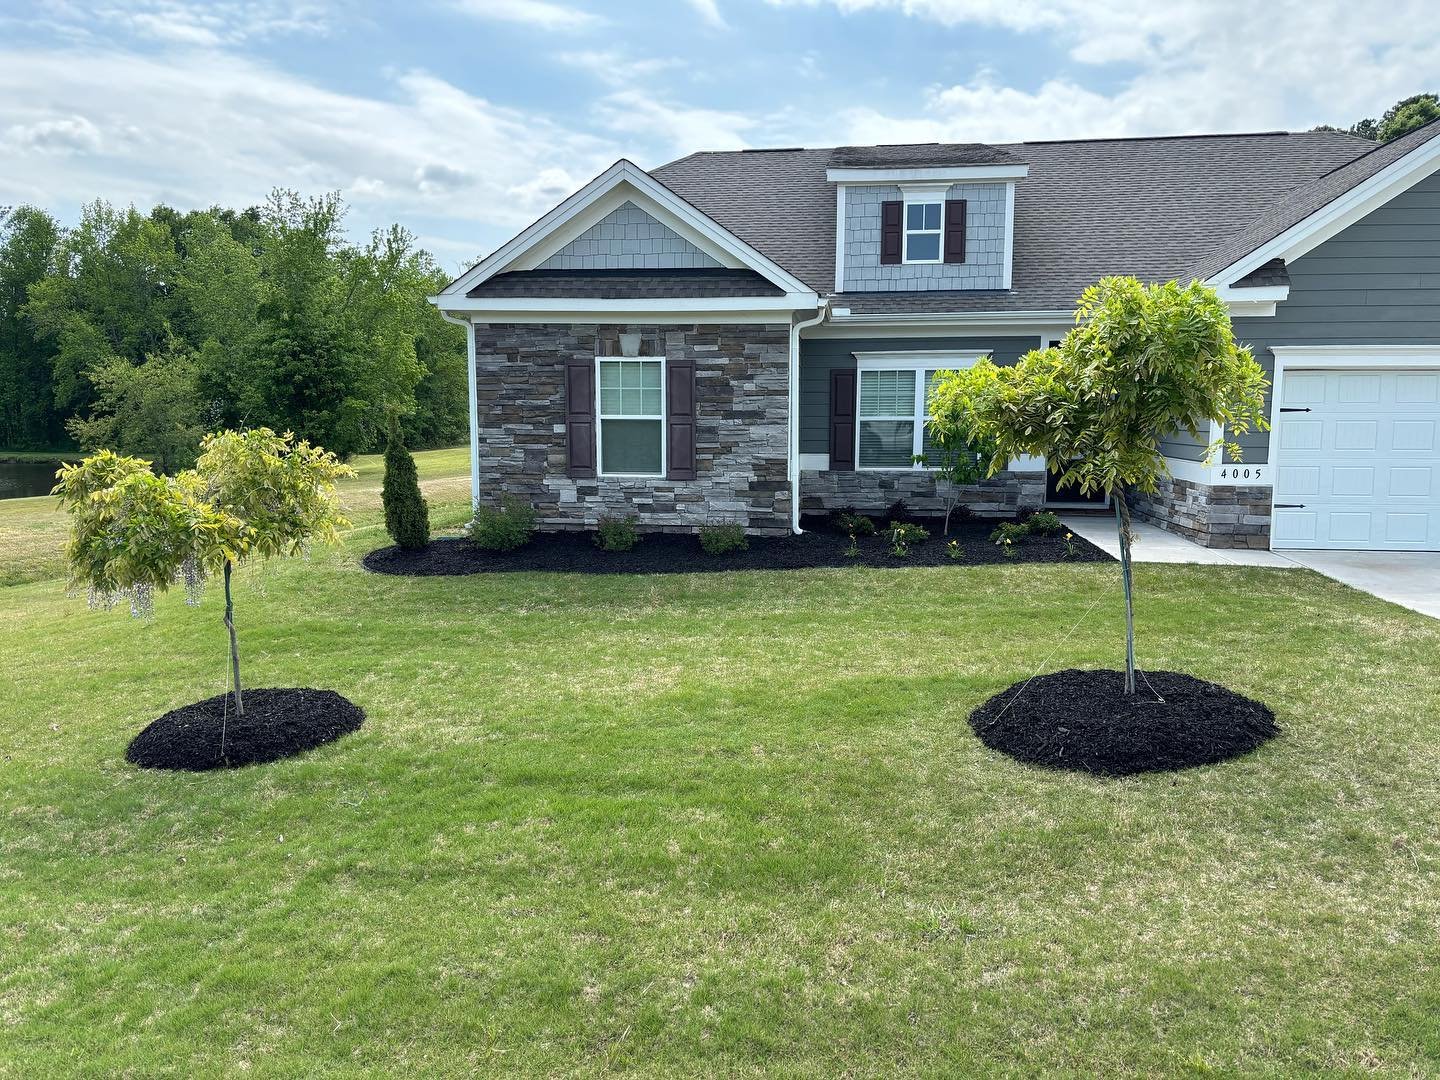 Another successful landscape installation. How satisfying is that?!

Contact us to plan your landscape⬇️
💻higginslandscape.com
☎️ (910) 890-8080

#landscapeinstallation #nc #nchomes